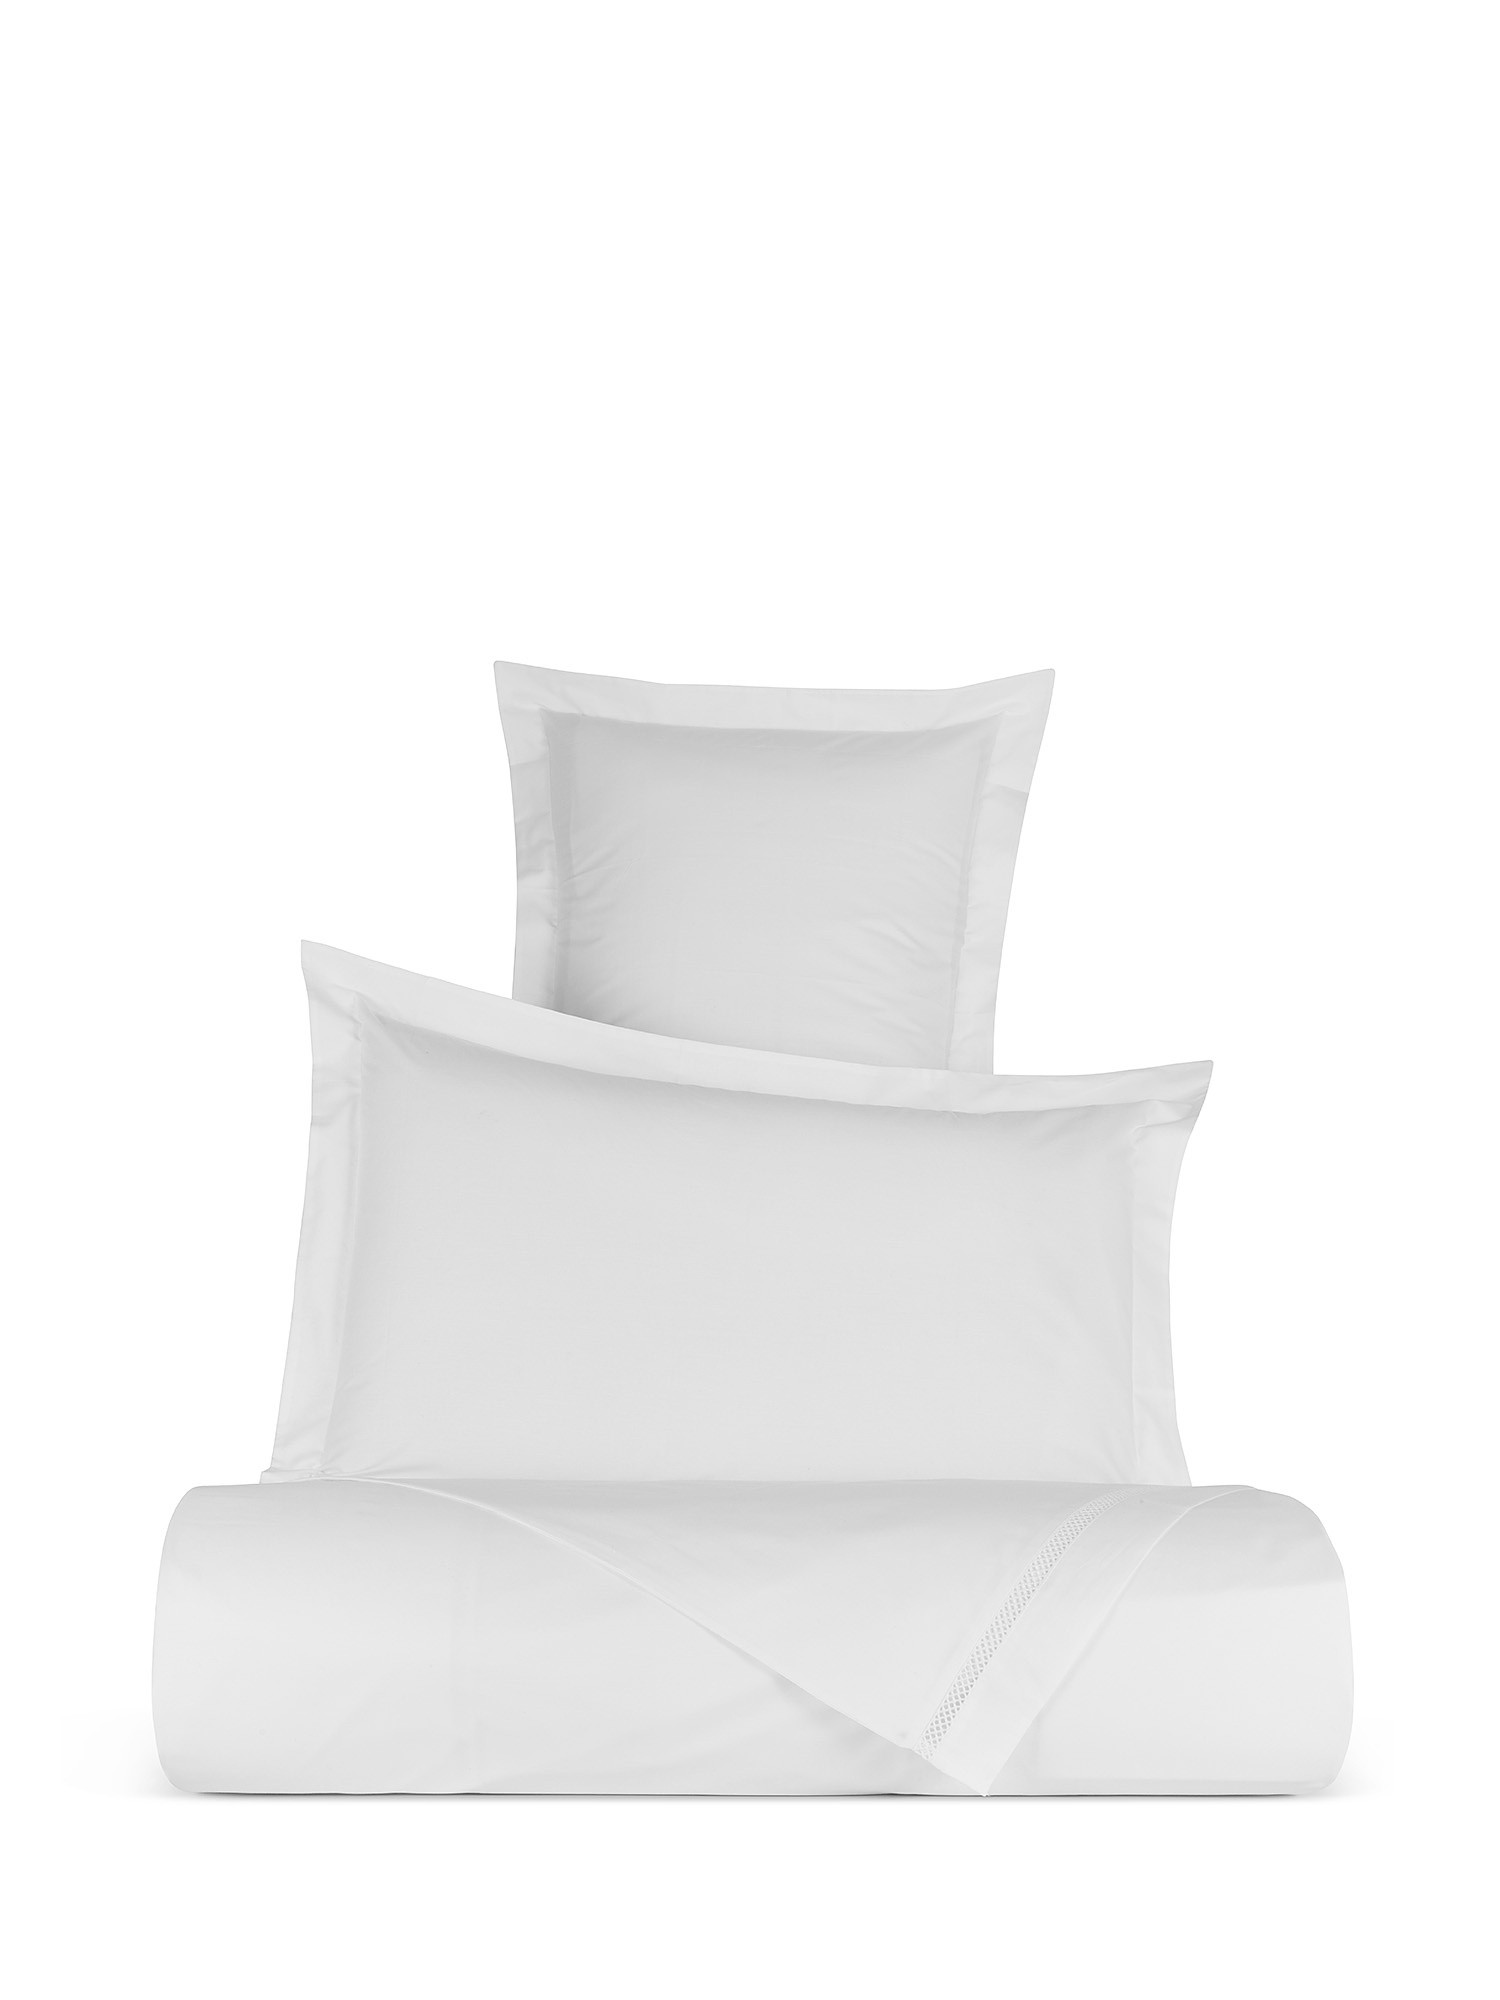 Portofino duvet cover in 100% cotton percale with drawn thread work, White, large image number 0